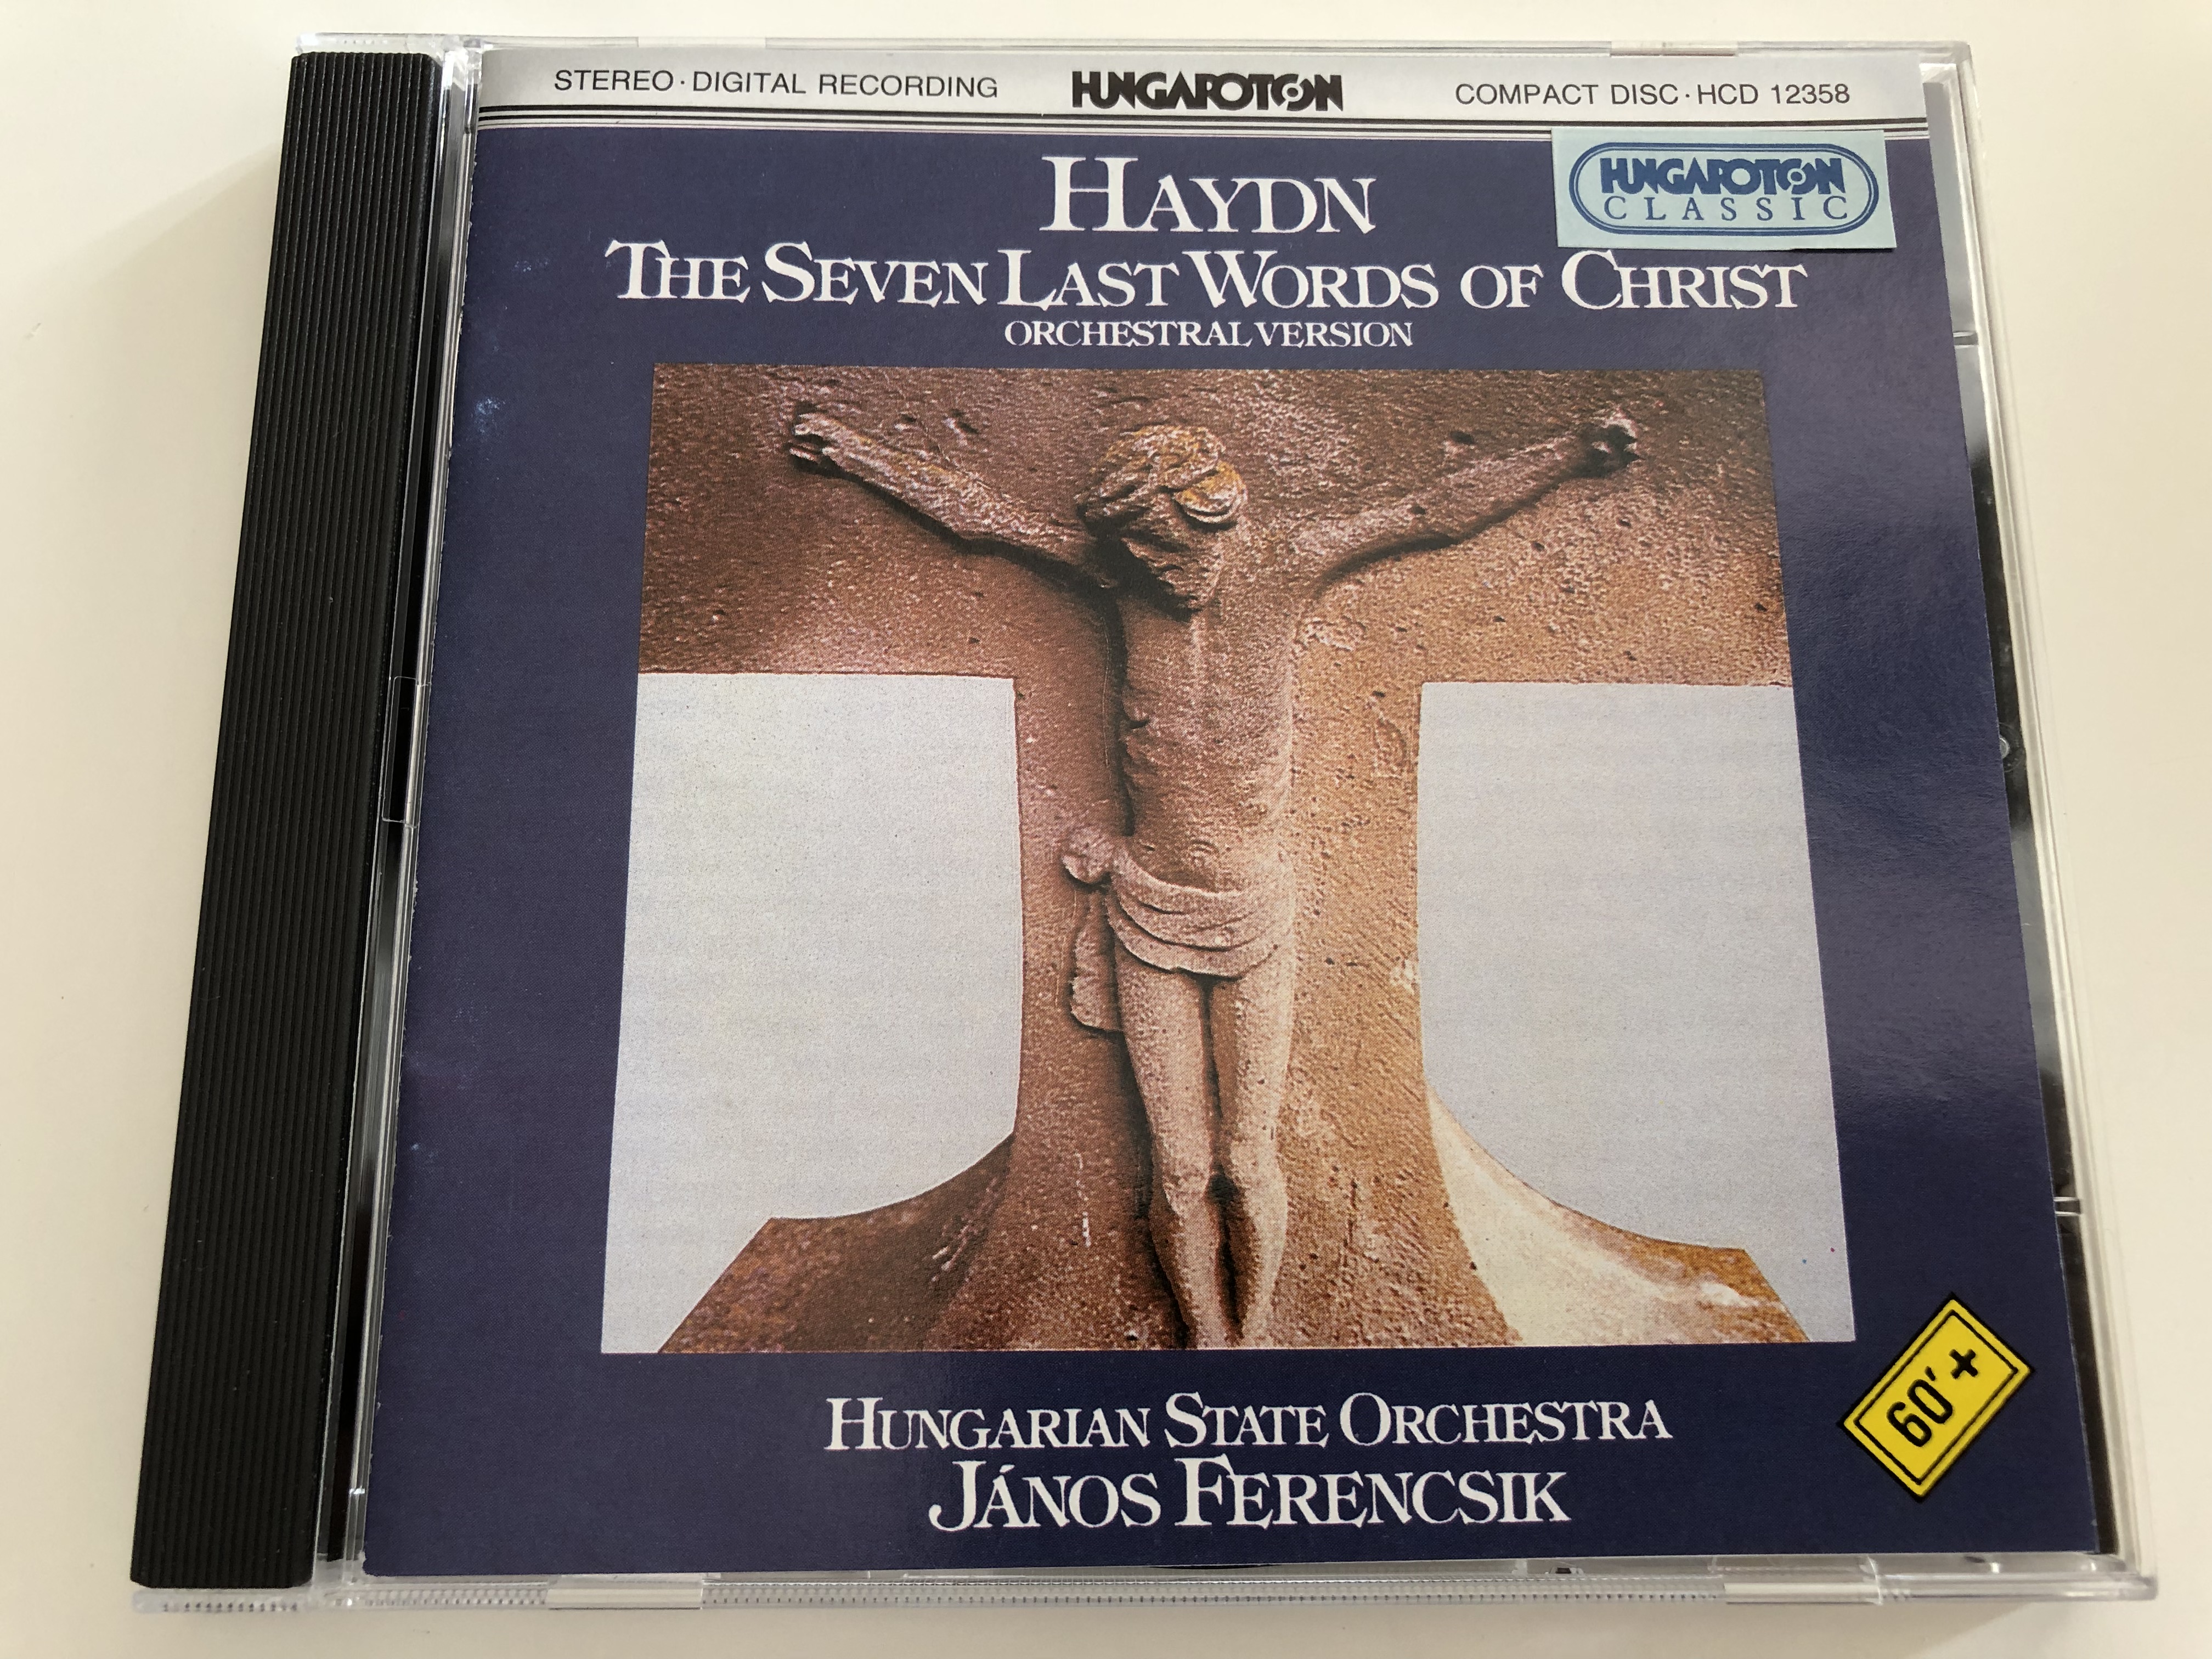 haydn-the-seven-last-words-of-christ-orchestral-version-hungarian-state-orchestra-conducted-by-j-nos-ferencsik-hungaroton-hcd-12358-audio-cd-1995-1-.jpg